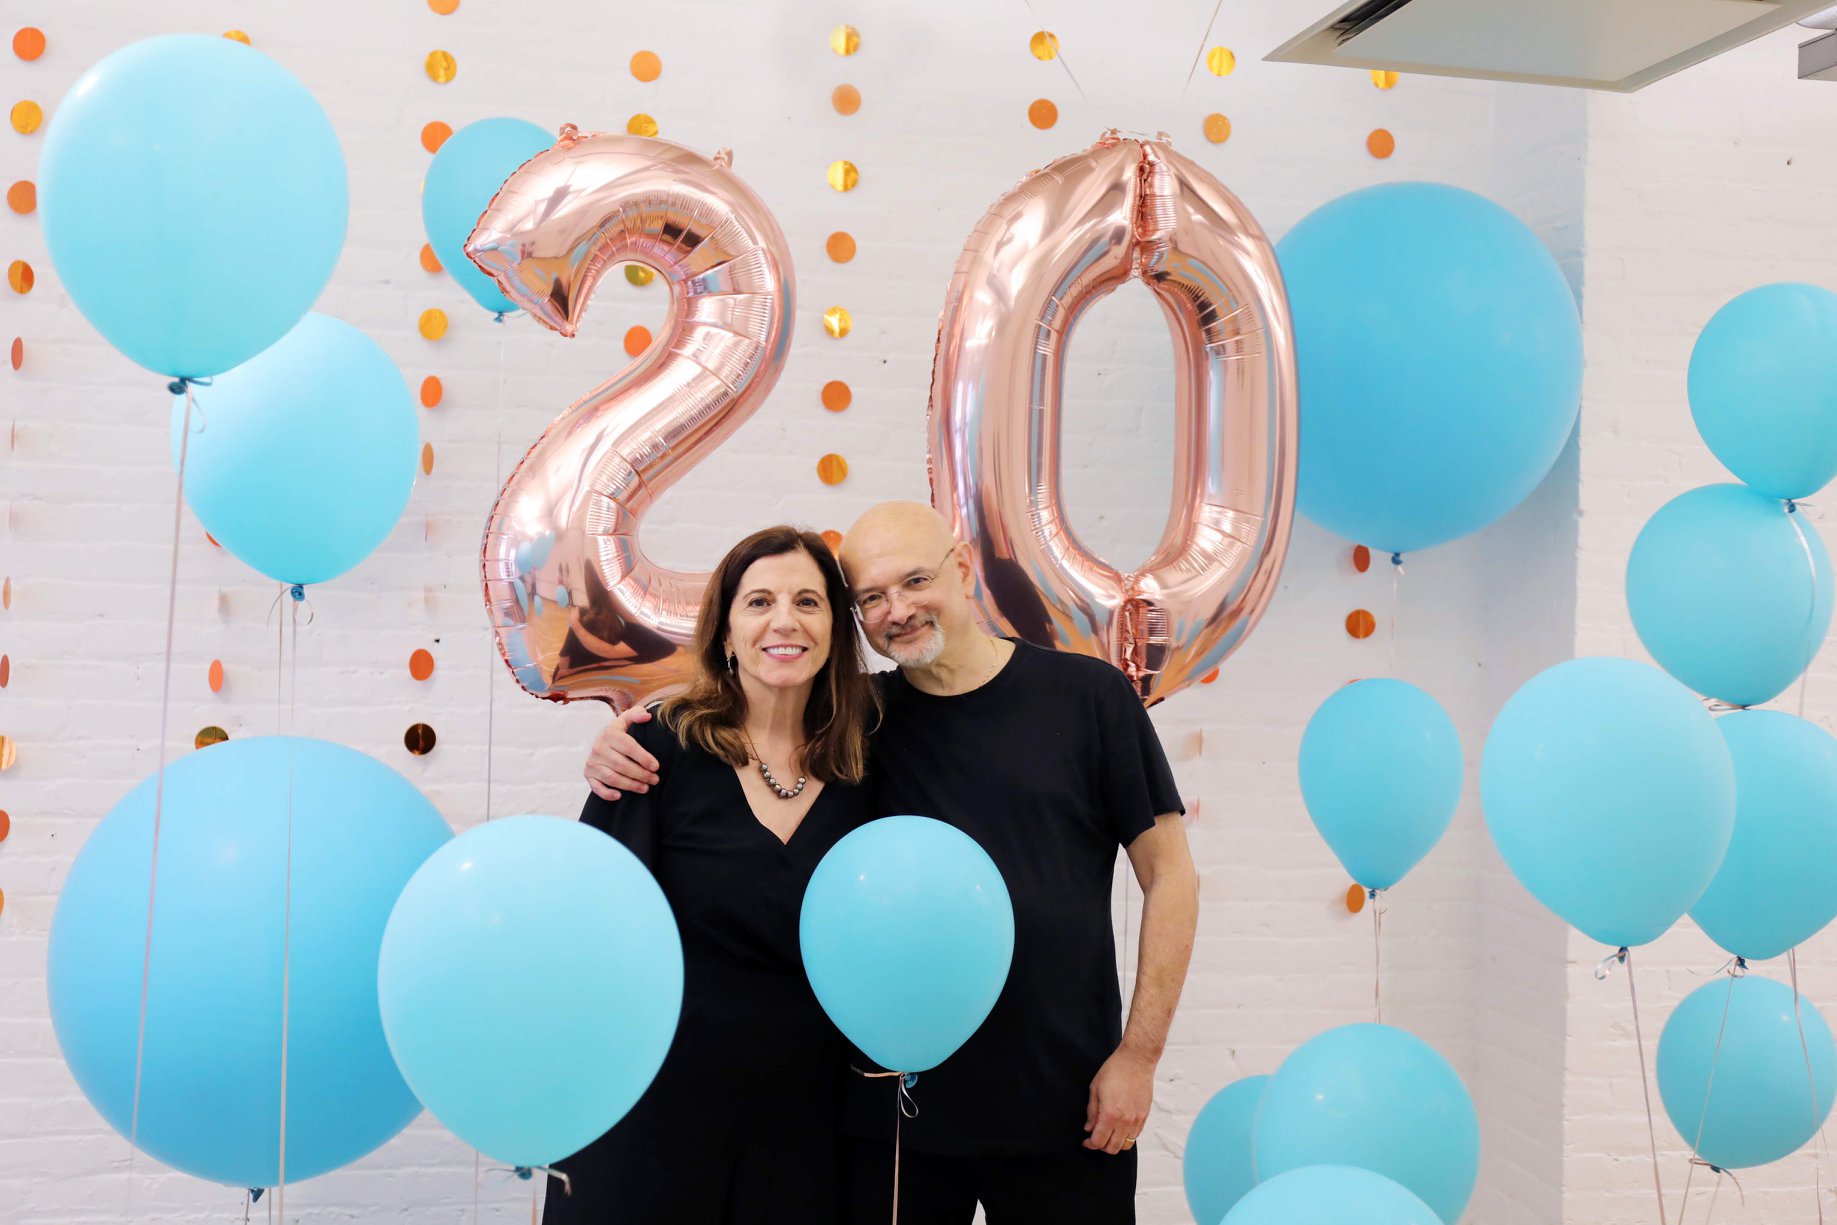 A  photo of a man and a woman surrounded by blue balloons and behind them two balloons that resemble the number twenty.